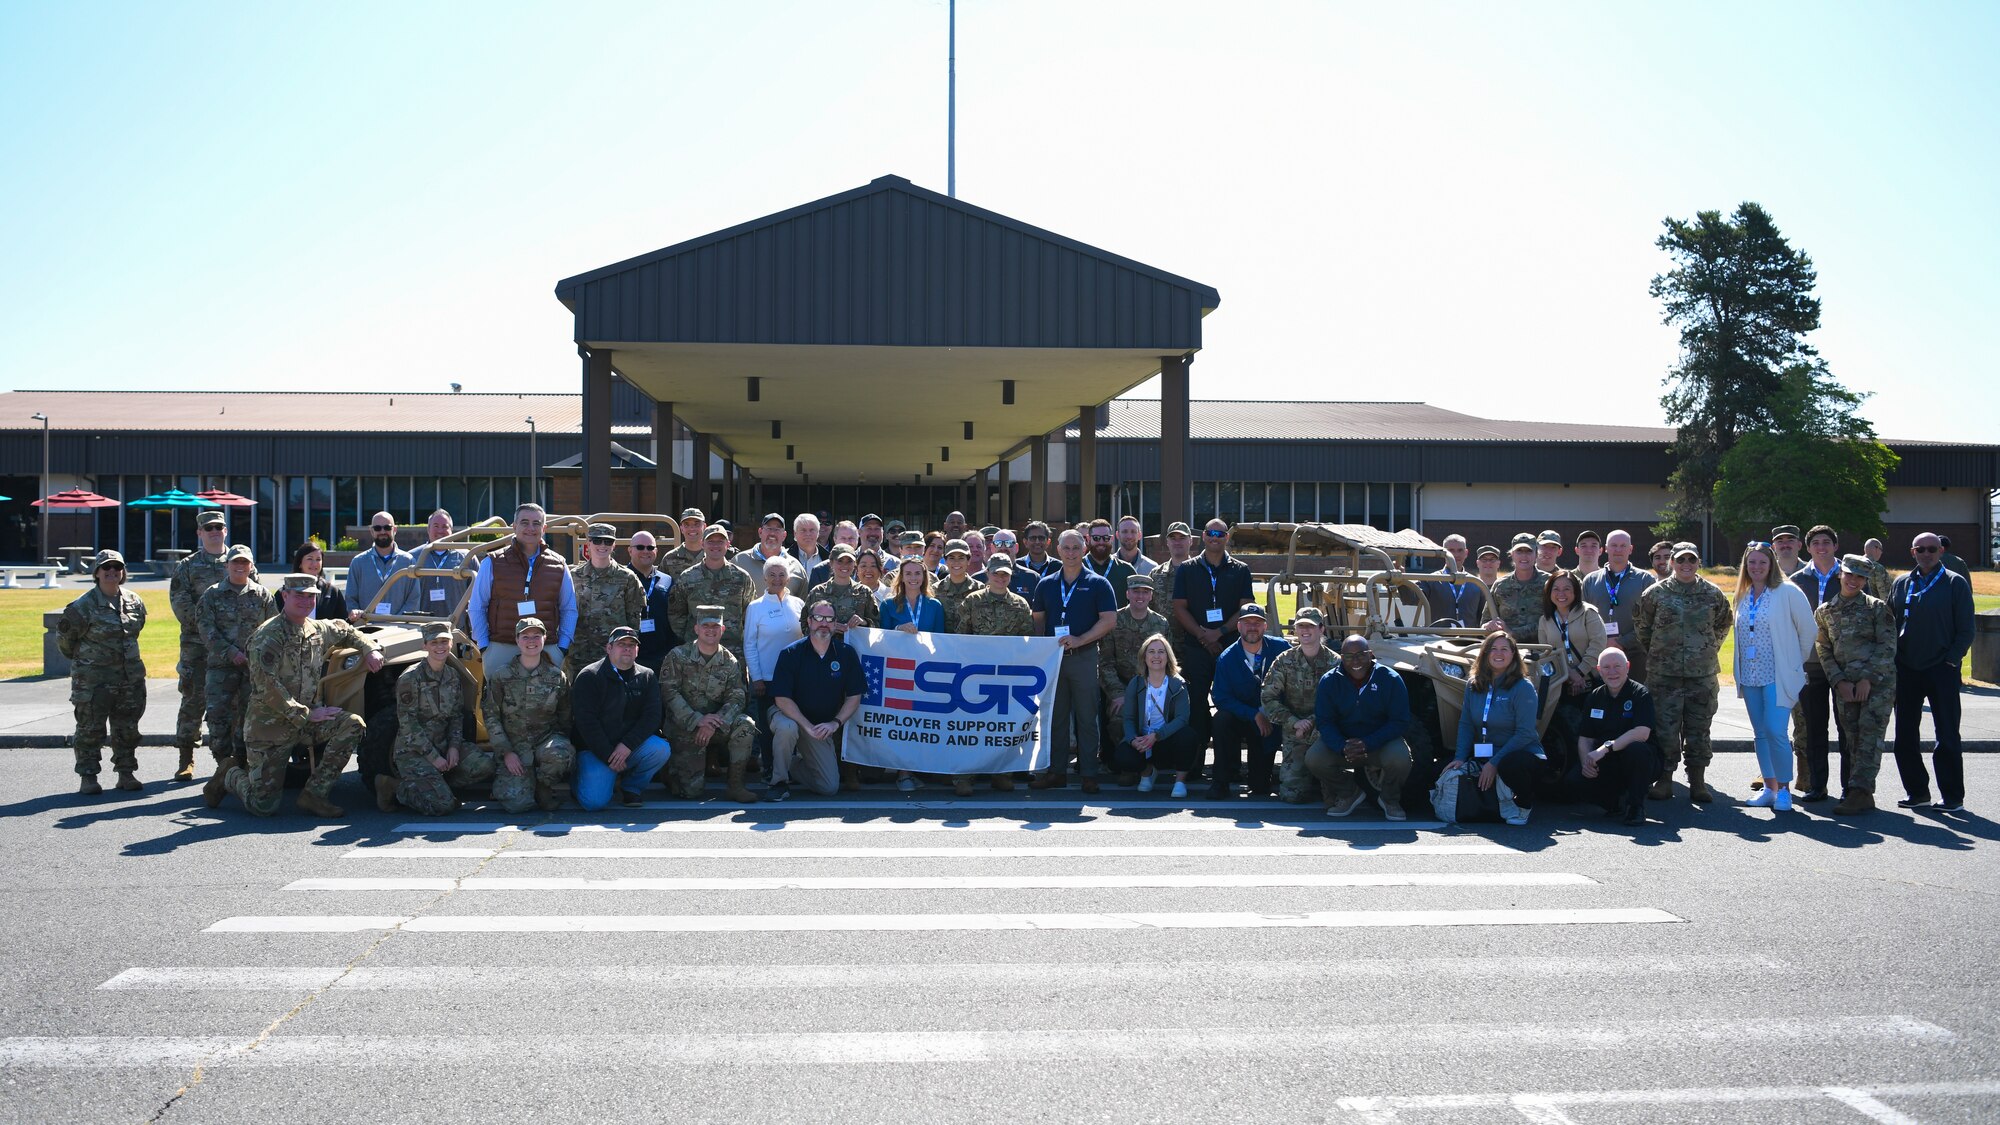 A group photo of civilians and Reservists in front of a building.